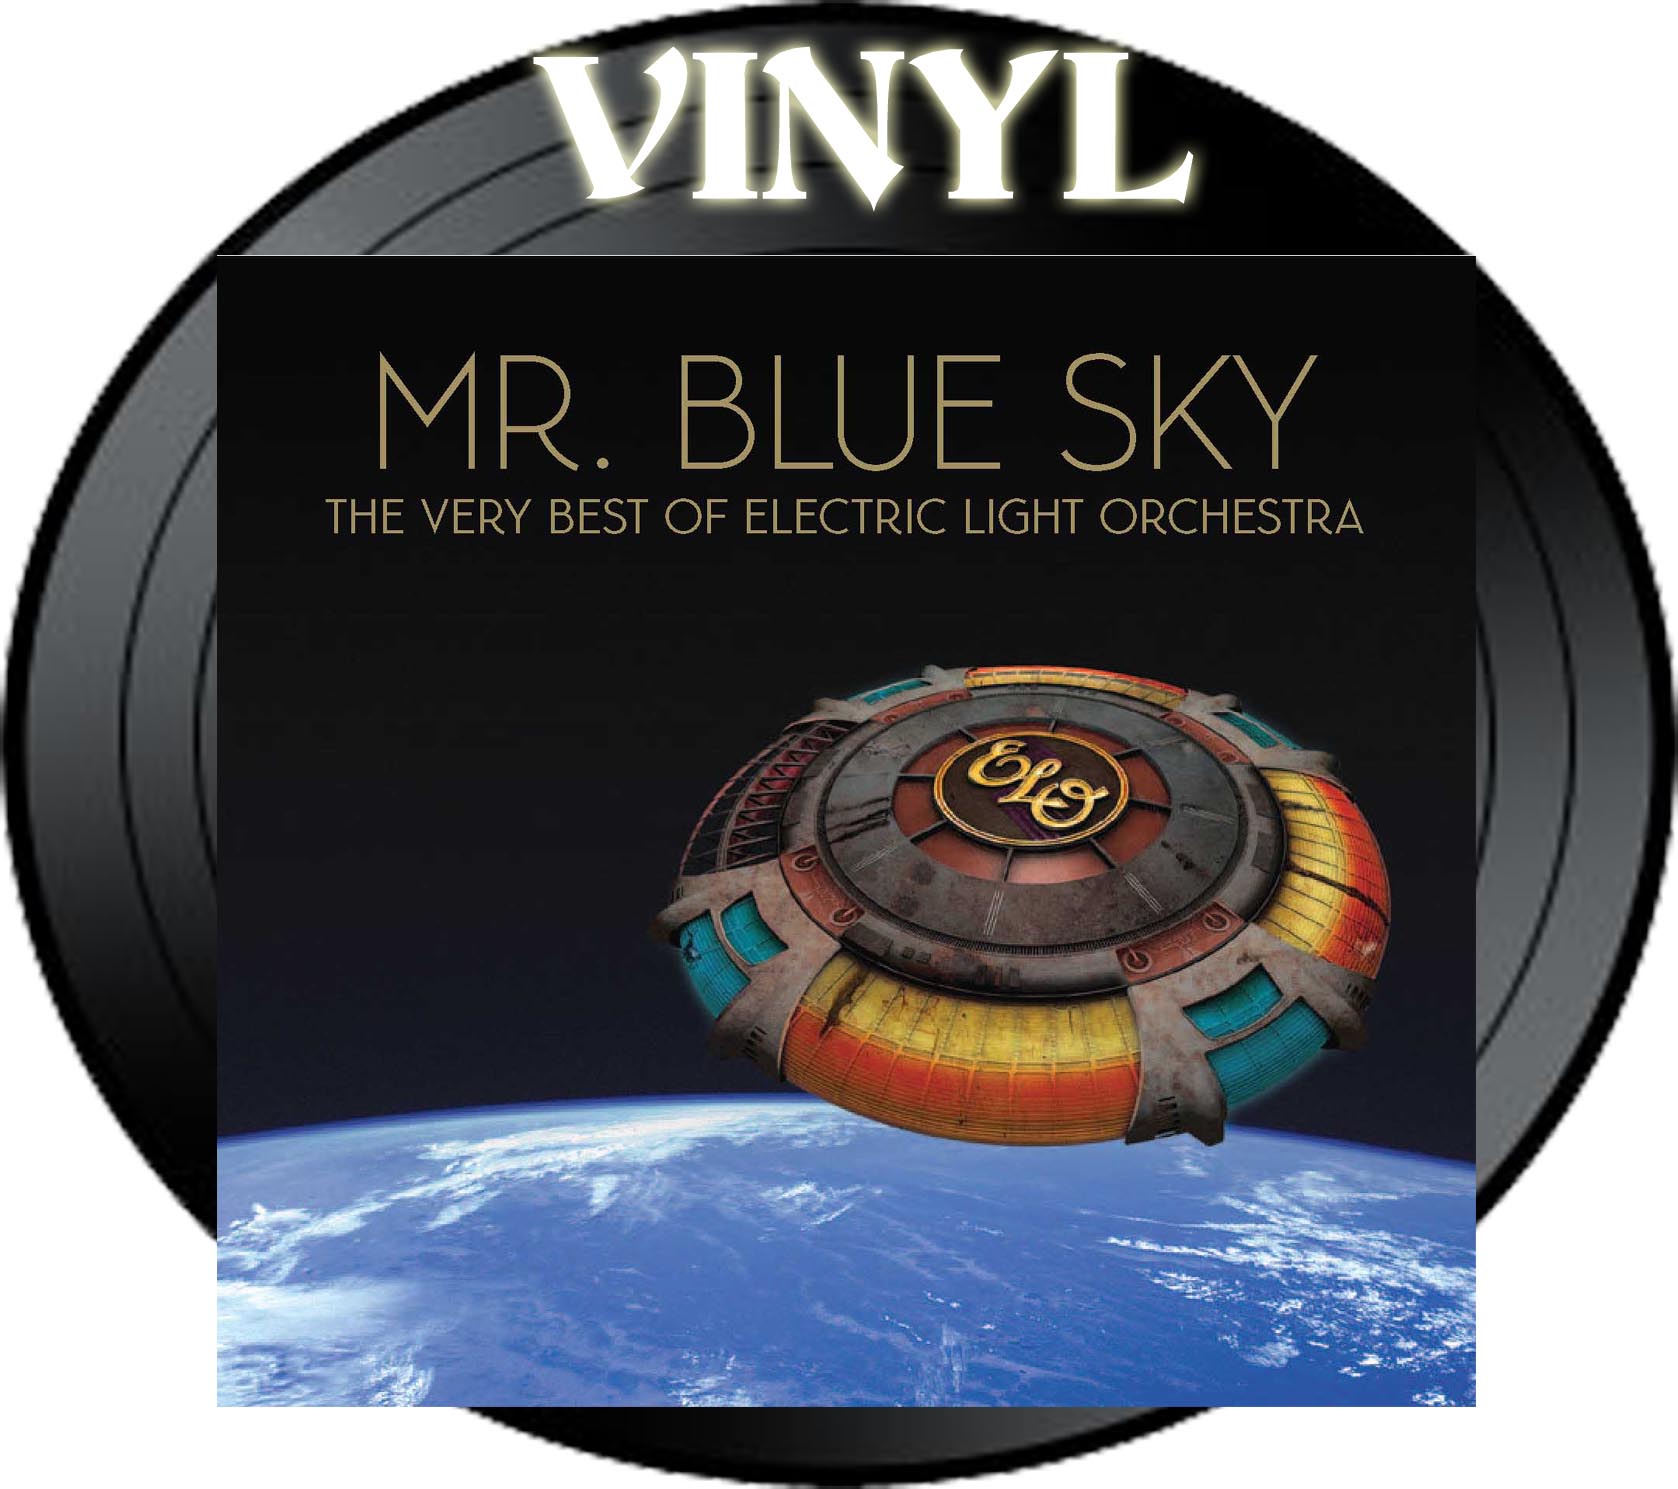 Electric Light Orchestra - Mr. Blue Sky - The Very Best of Electric Light Orchestra (Vinyl)